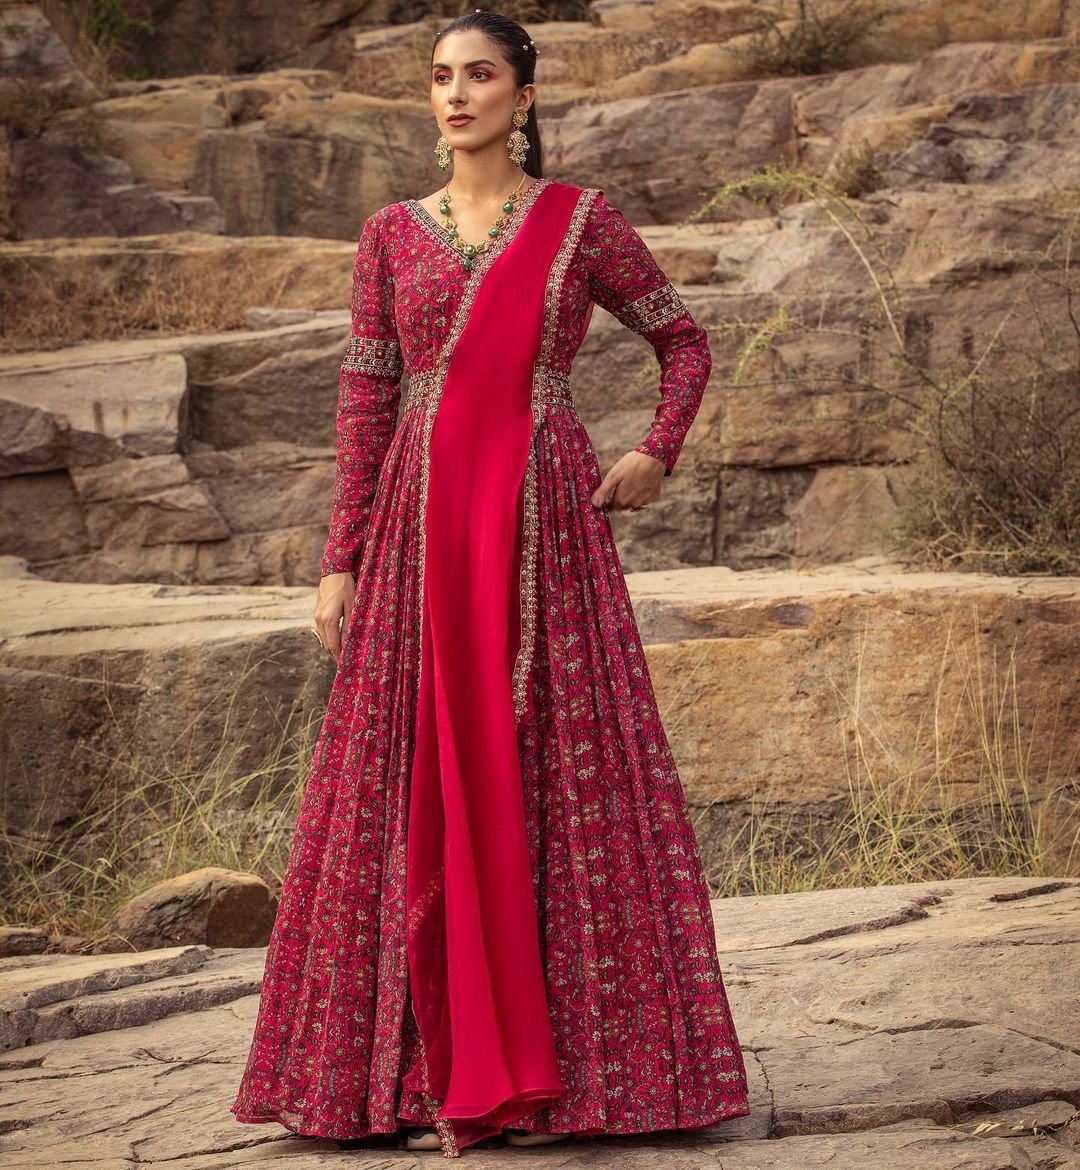 Indian Wedding Guest Outfit Ideas Inspired by the Fashion Designers